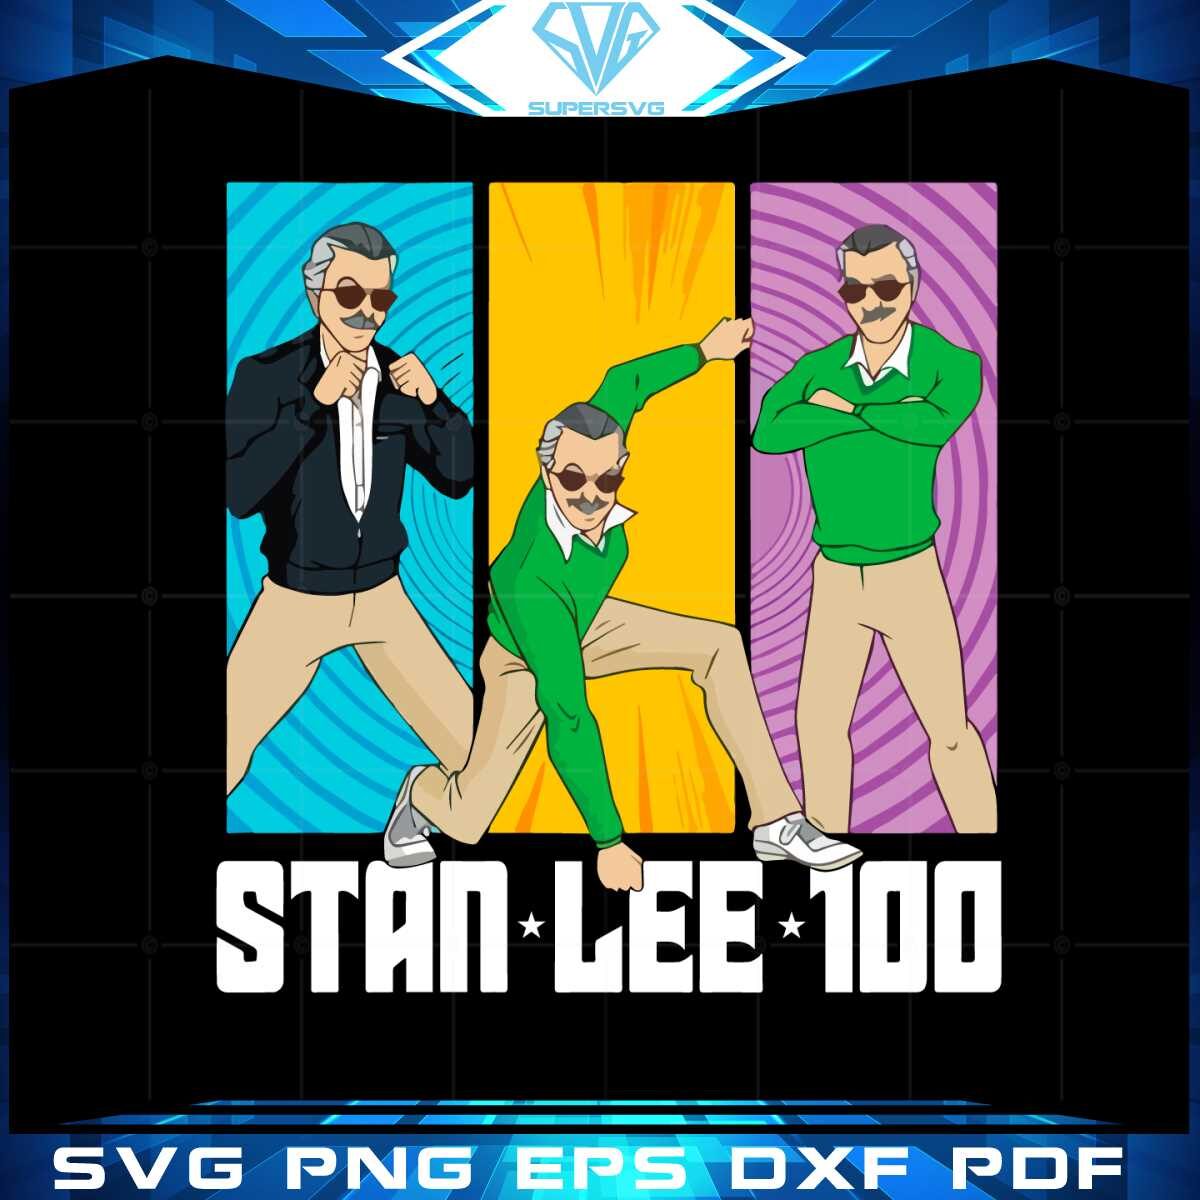 stan-lee-100-svg-cutting-file-for-personal-commercial-uses